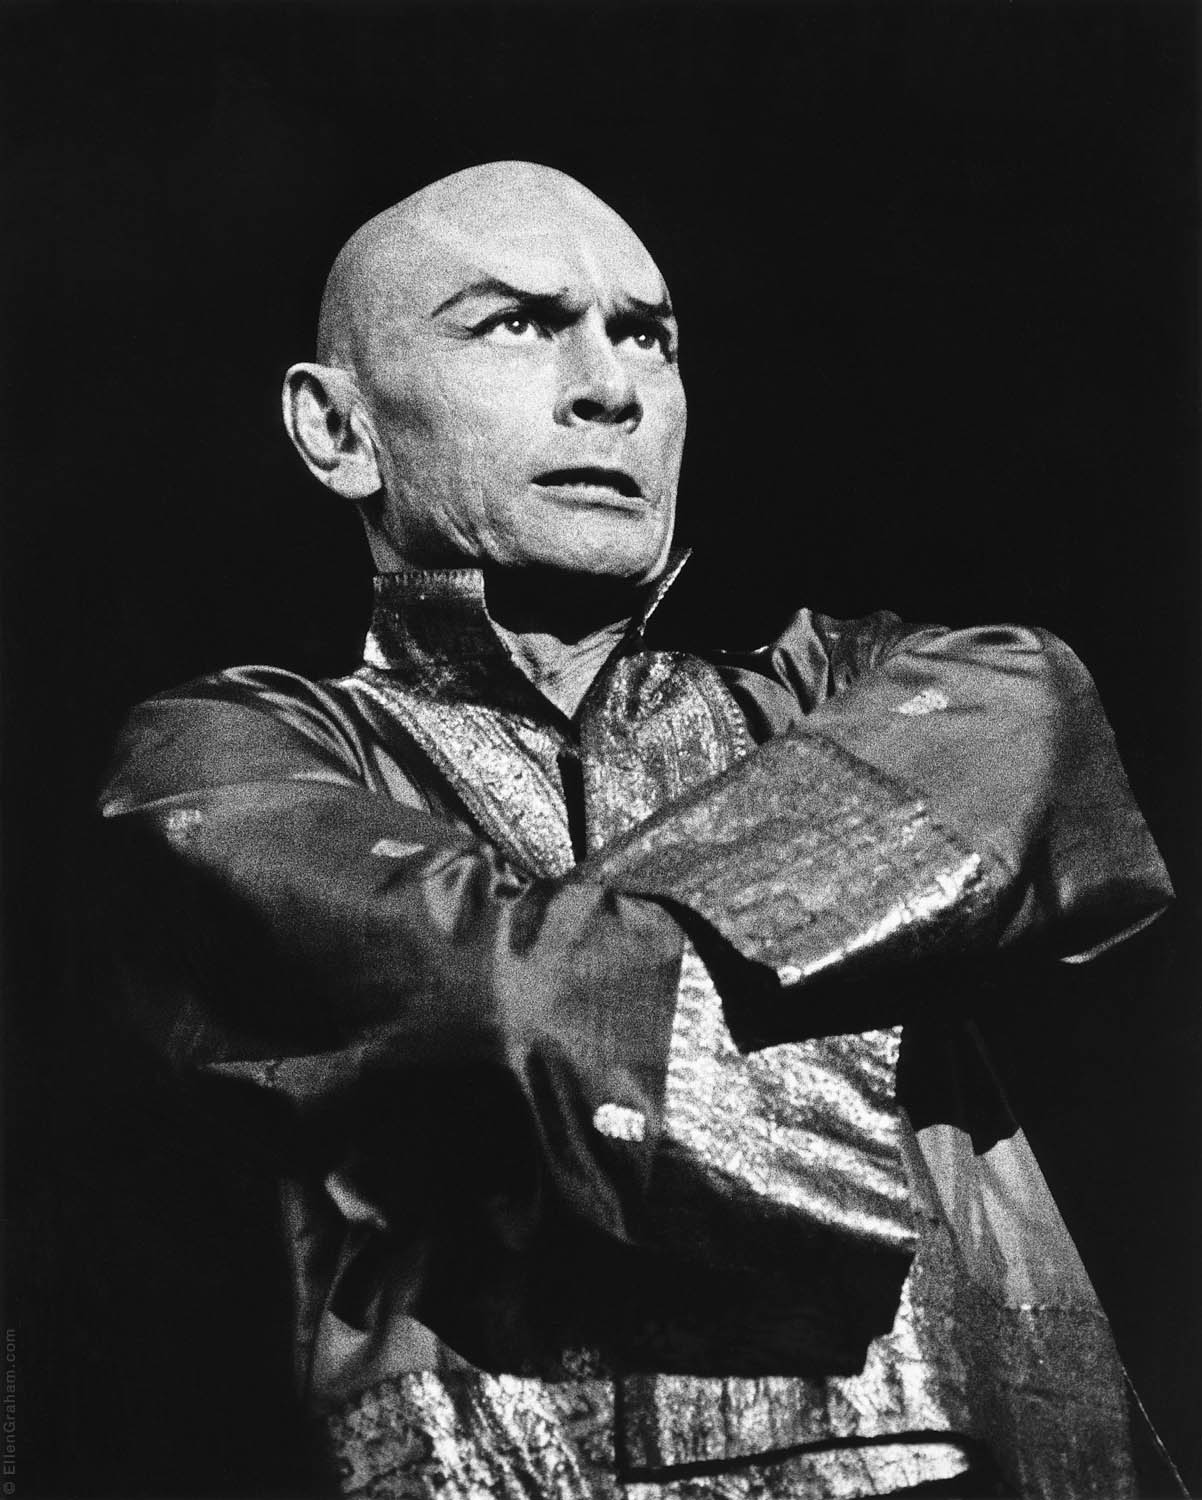 Yul Brynner, "The King and I," New York, NY, 1978